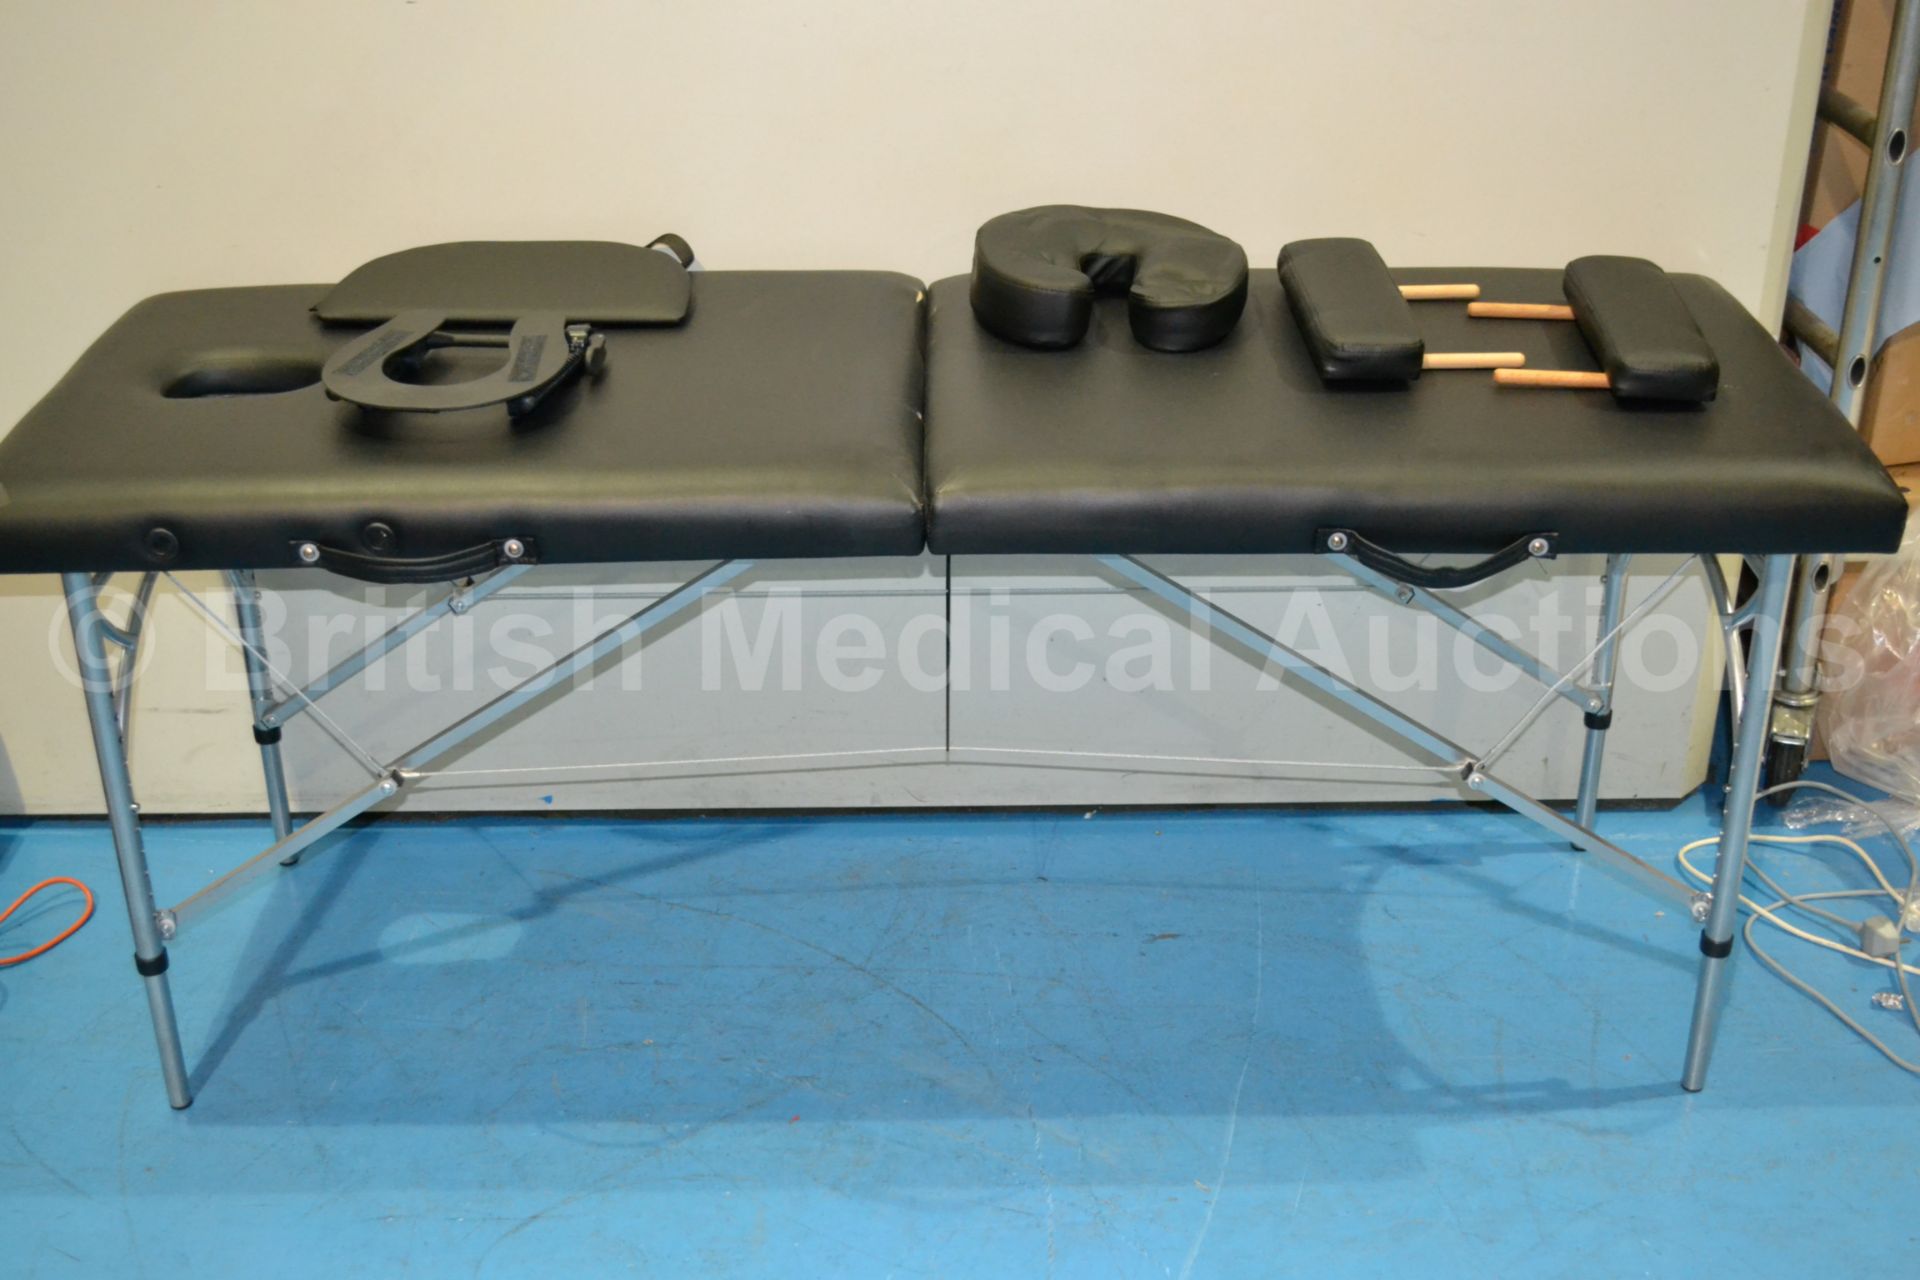 Foldable Patient Examination Couch With Accessorie - Image 2 of 4